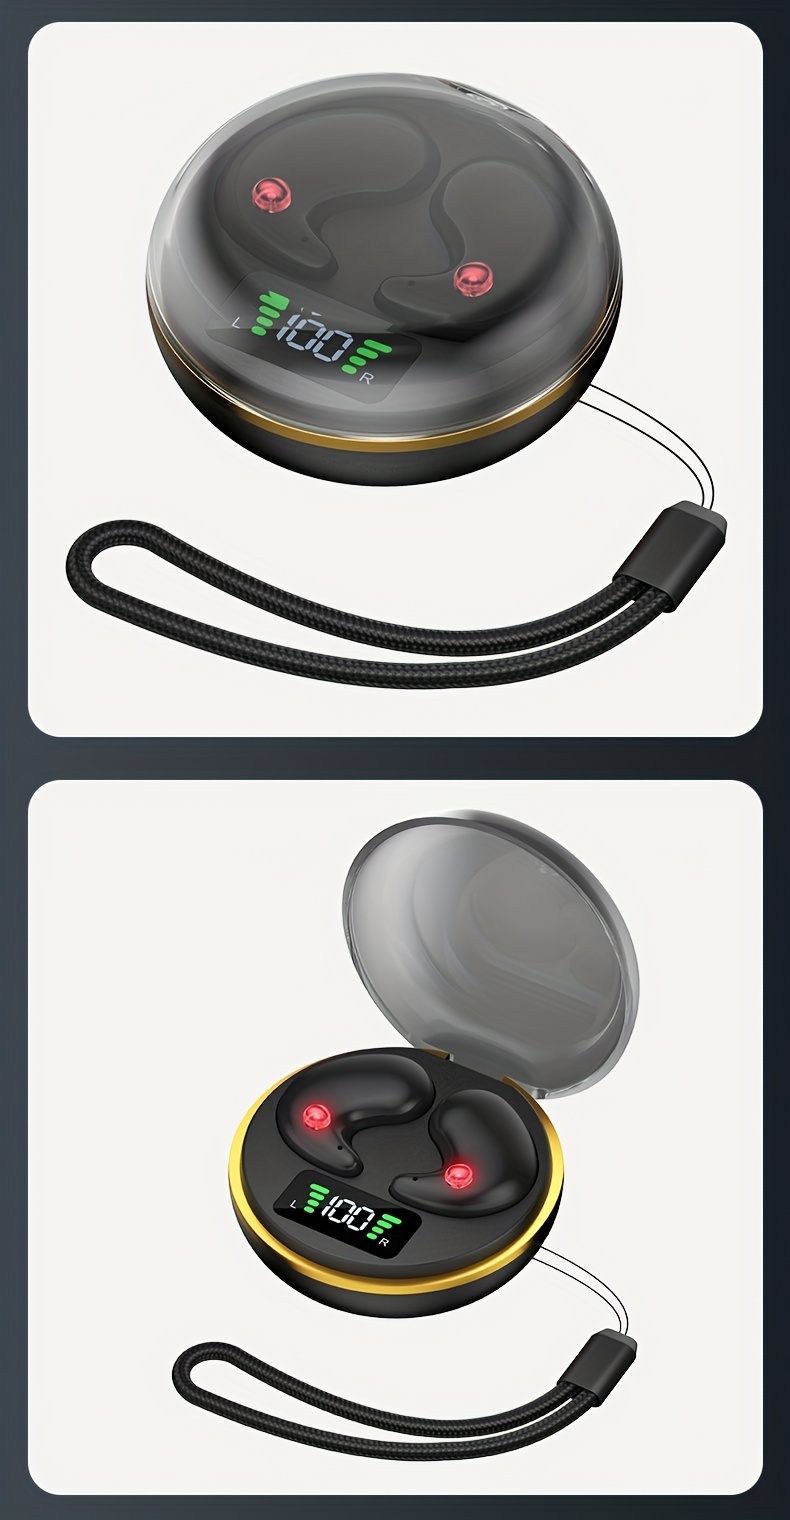 wireless 5 3tws sleep earphones with transparent charging compartment with strap led high definition digital display screen hifi sound quality stereo surround sound dedicated to sleep without detachment ultra high point endurance continuous listening all day mini music listening sports game earphones details 8